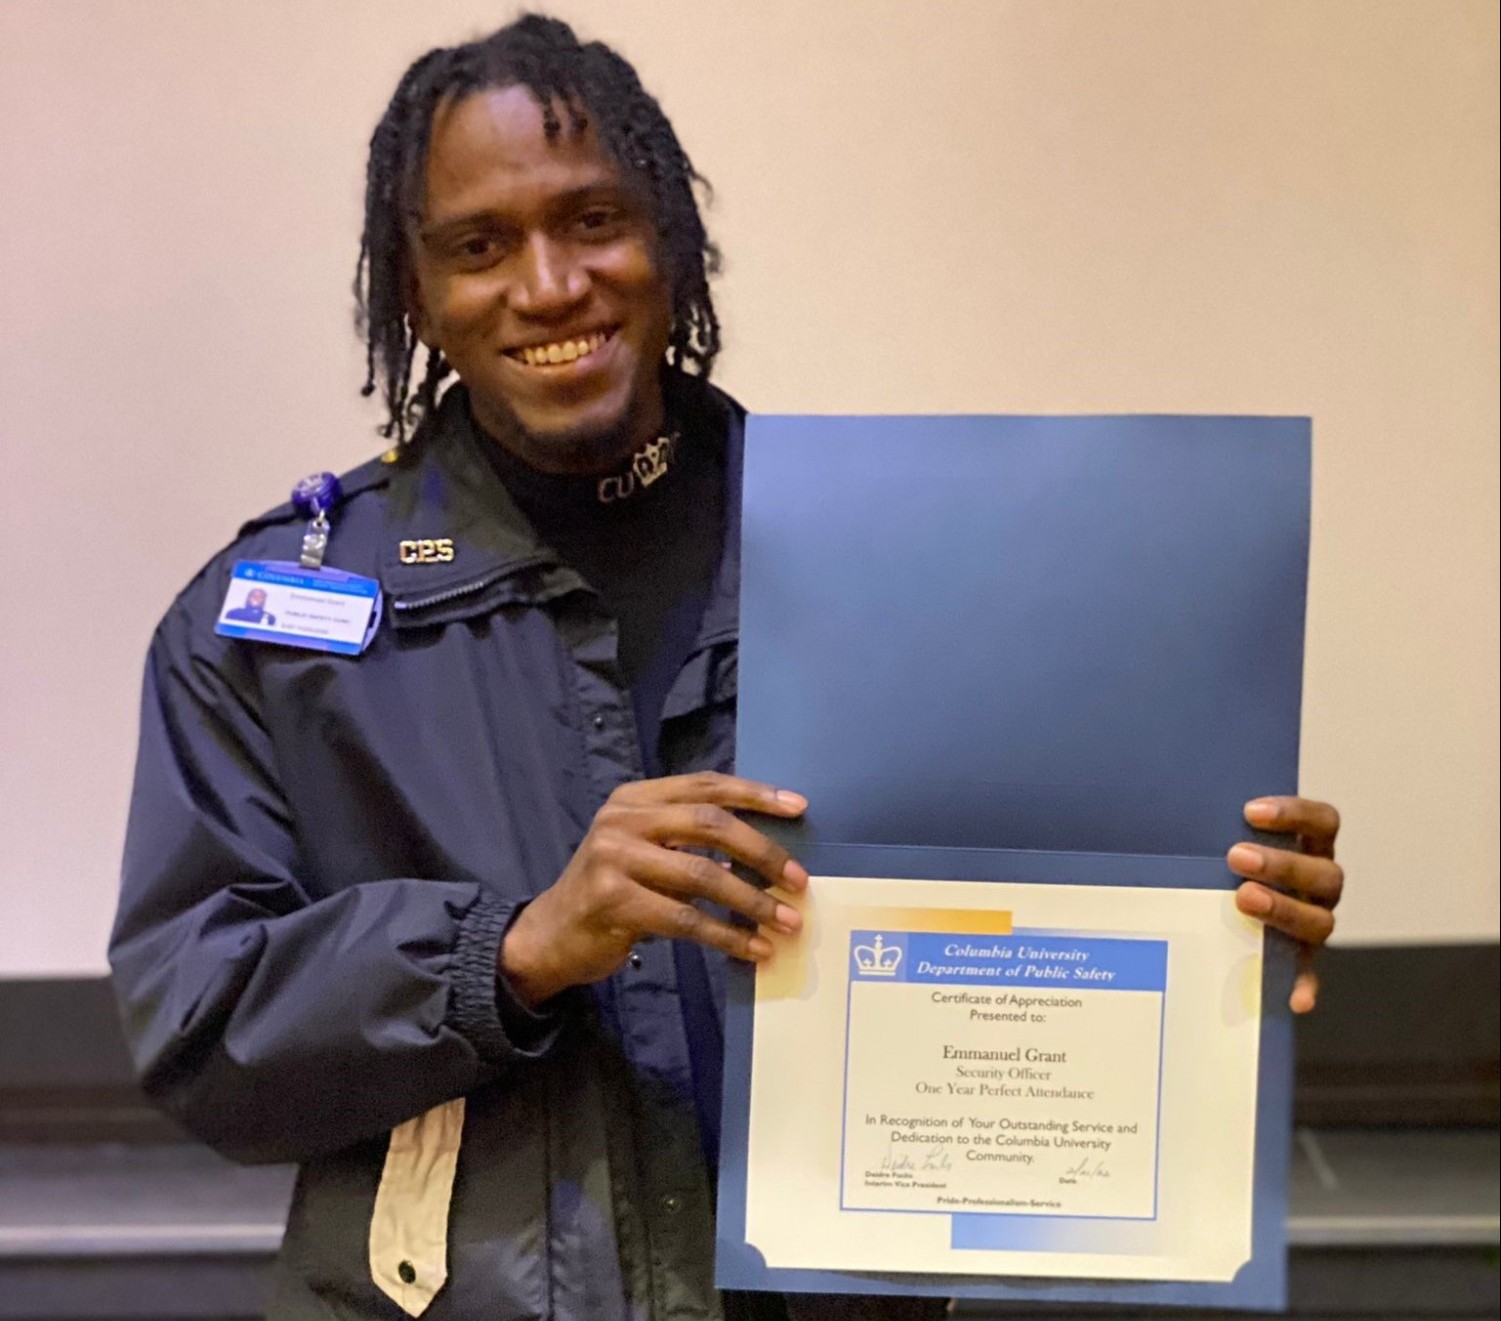 man in Public Safety uniform holding up a perfect attendance certificate